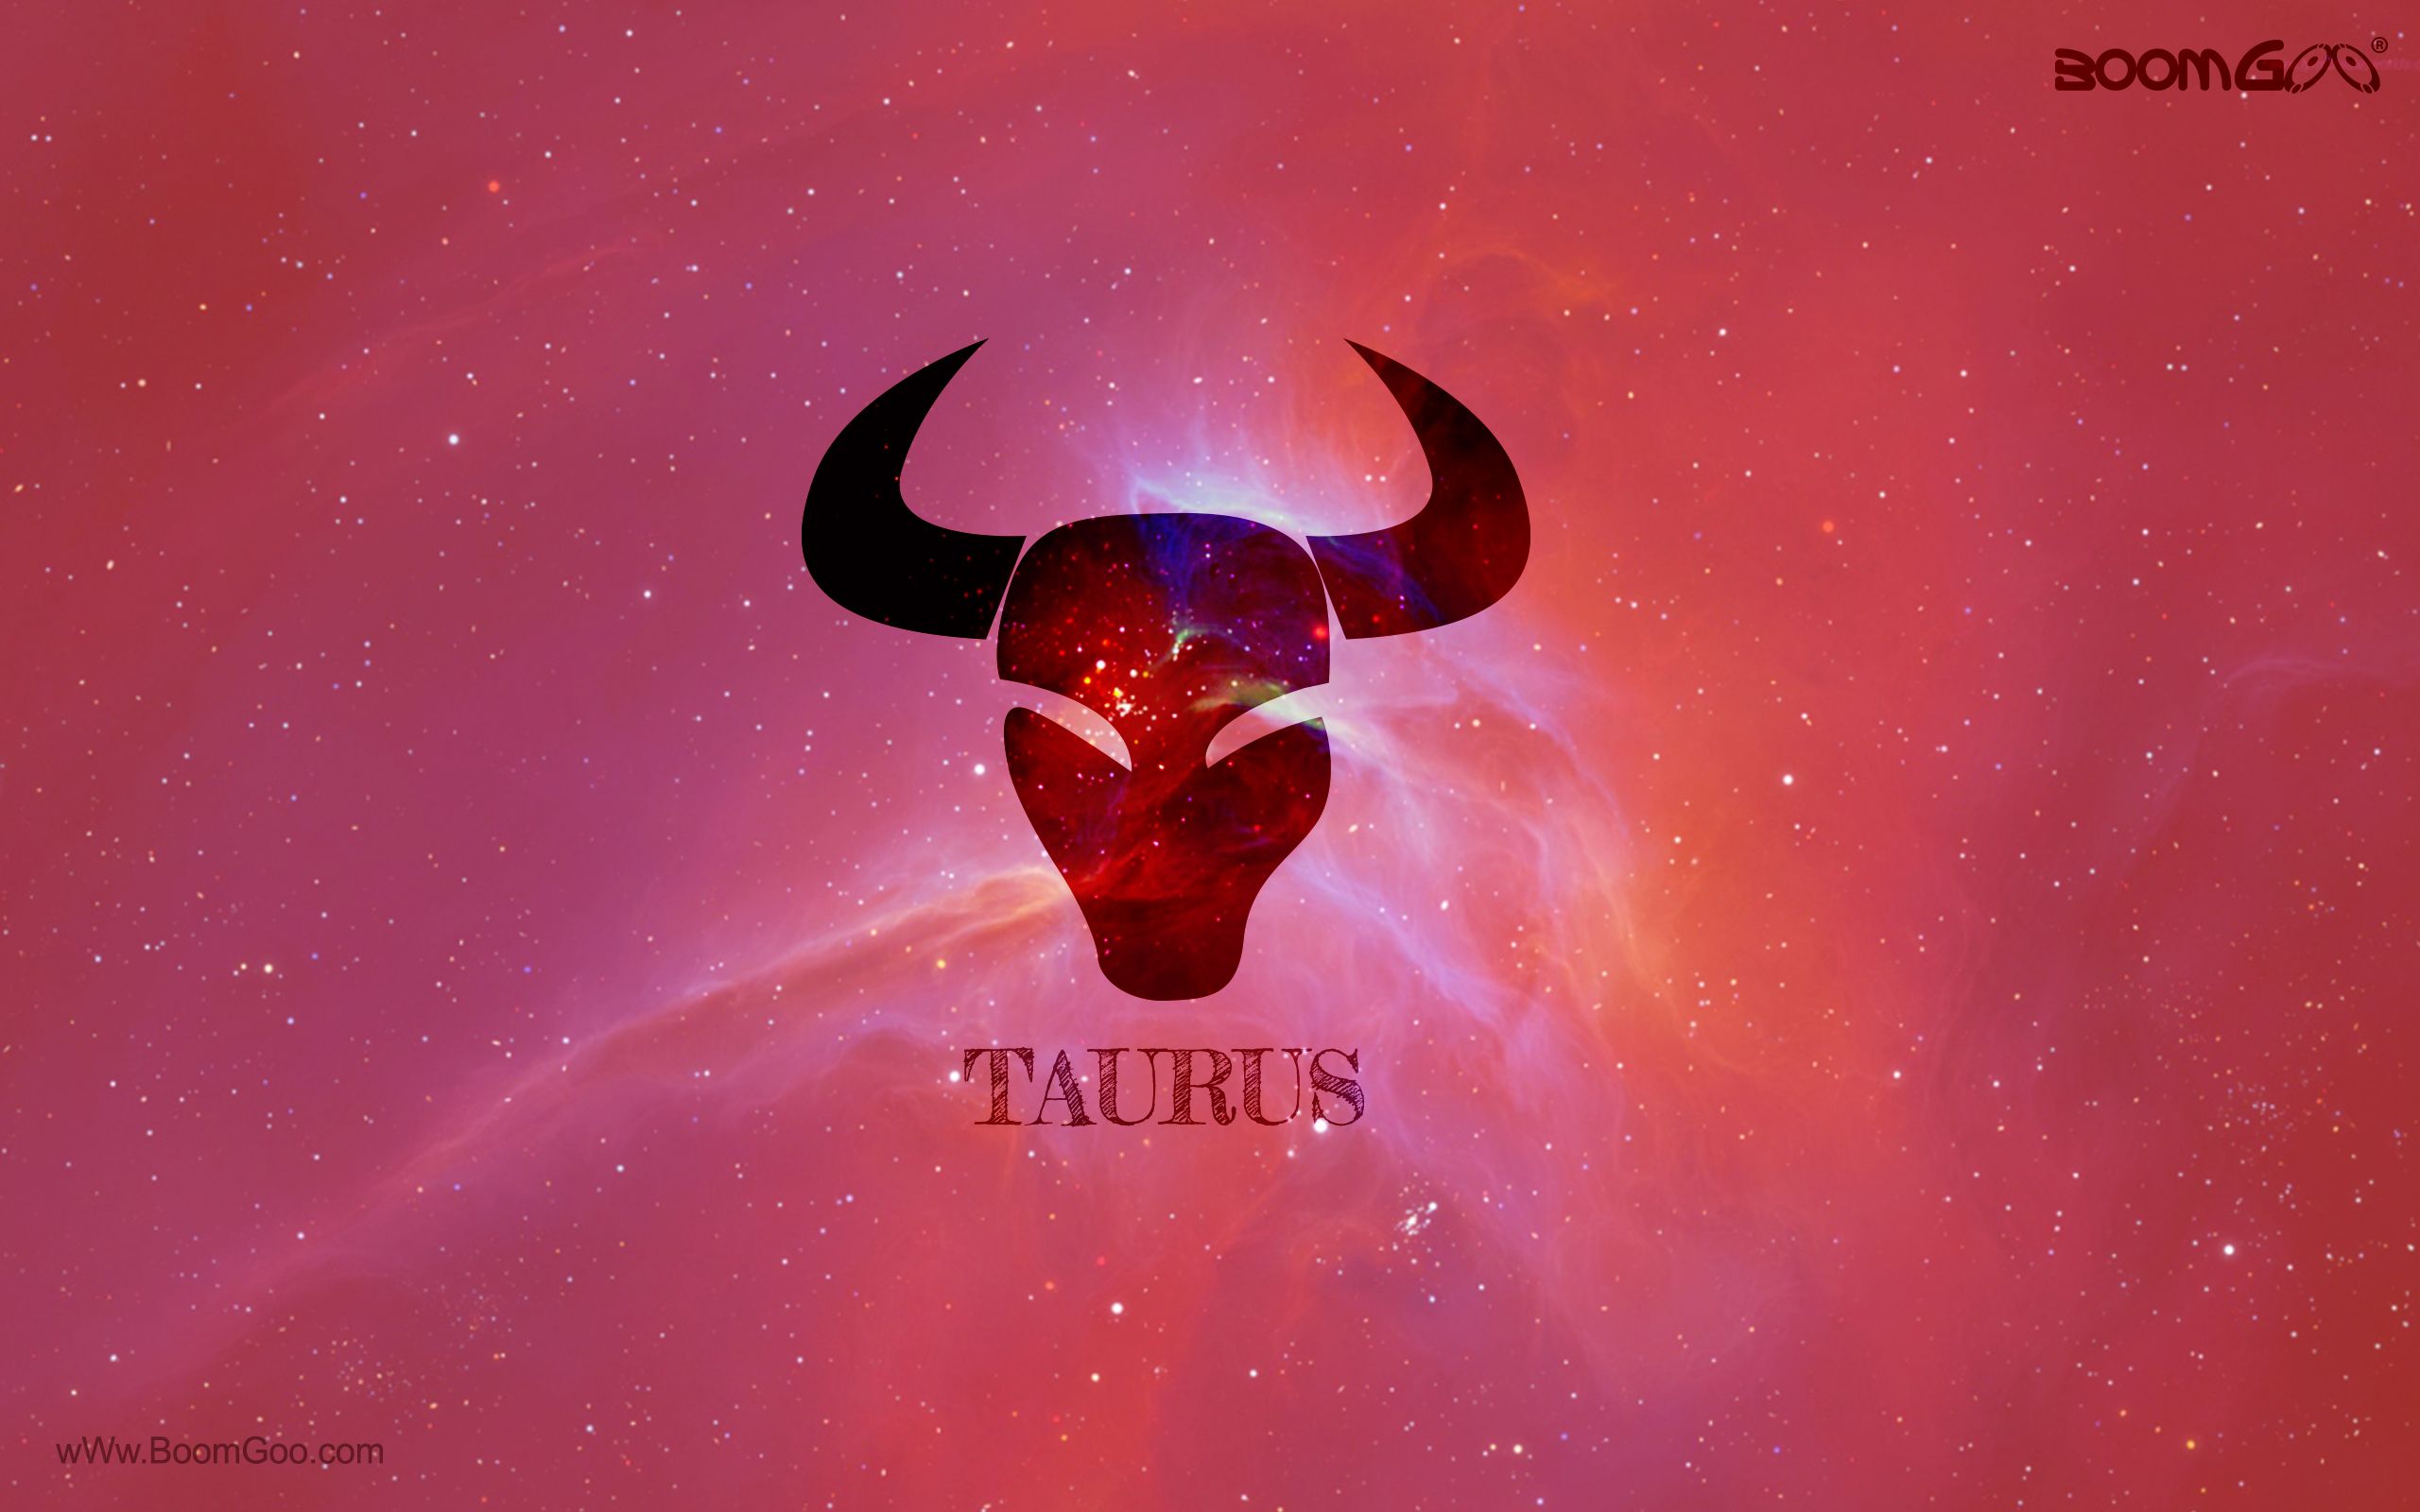 Taurus always keep their thoughts organised. Get more #zodiac